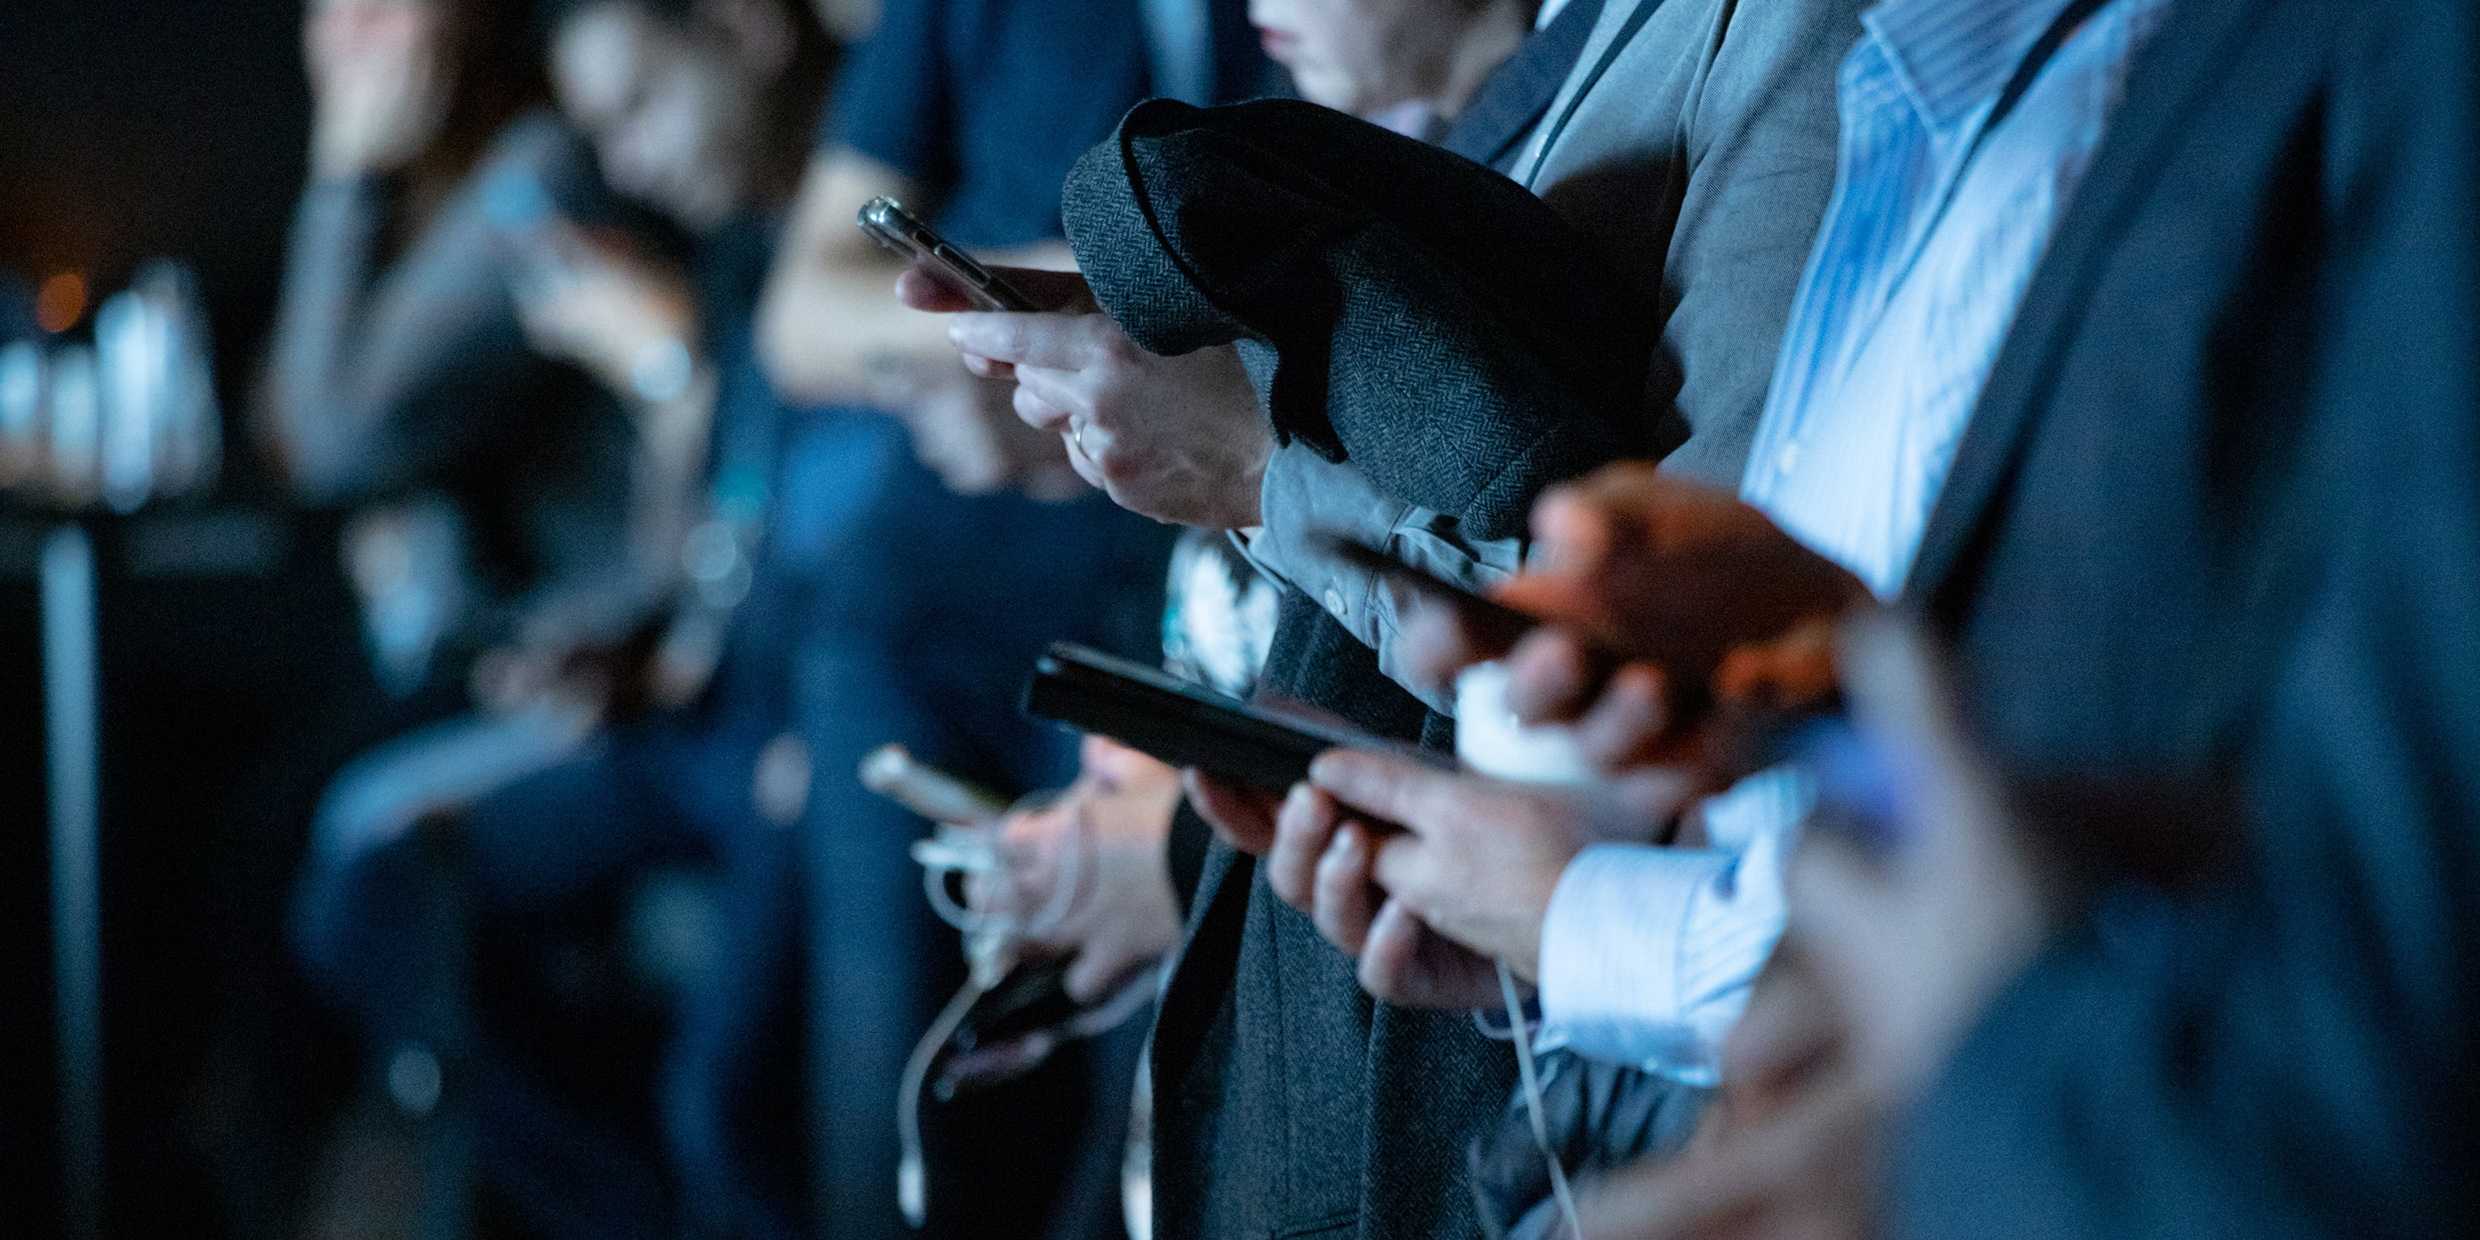 Image of a group of people interacting with their mobile devices